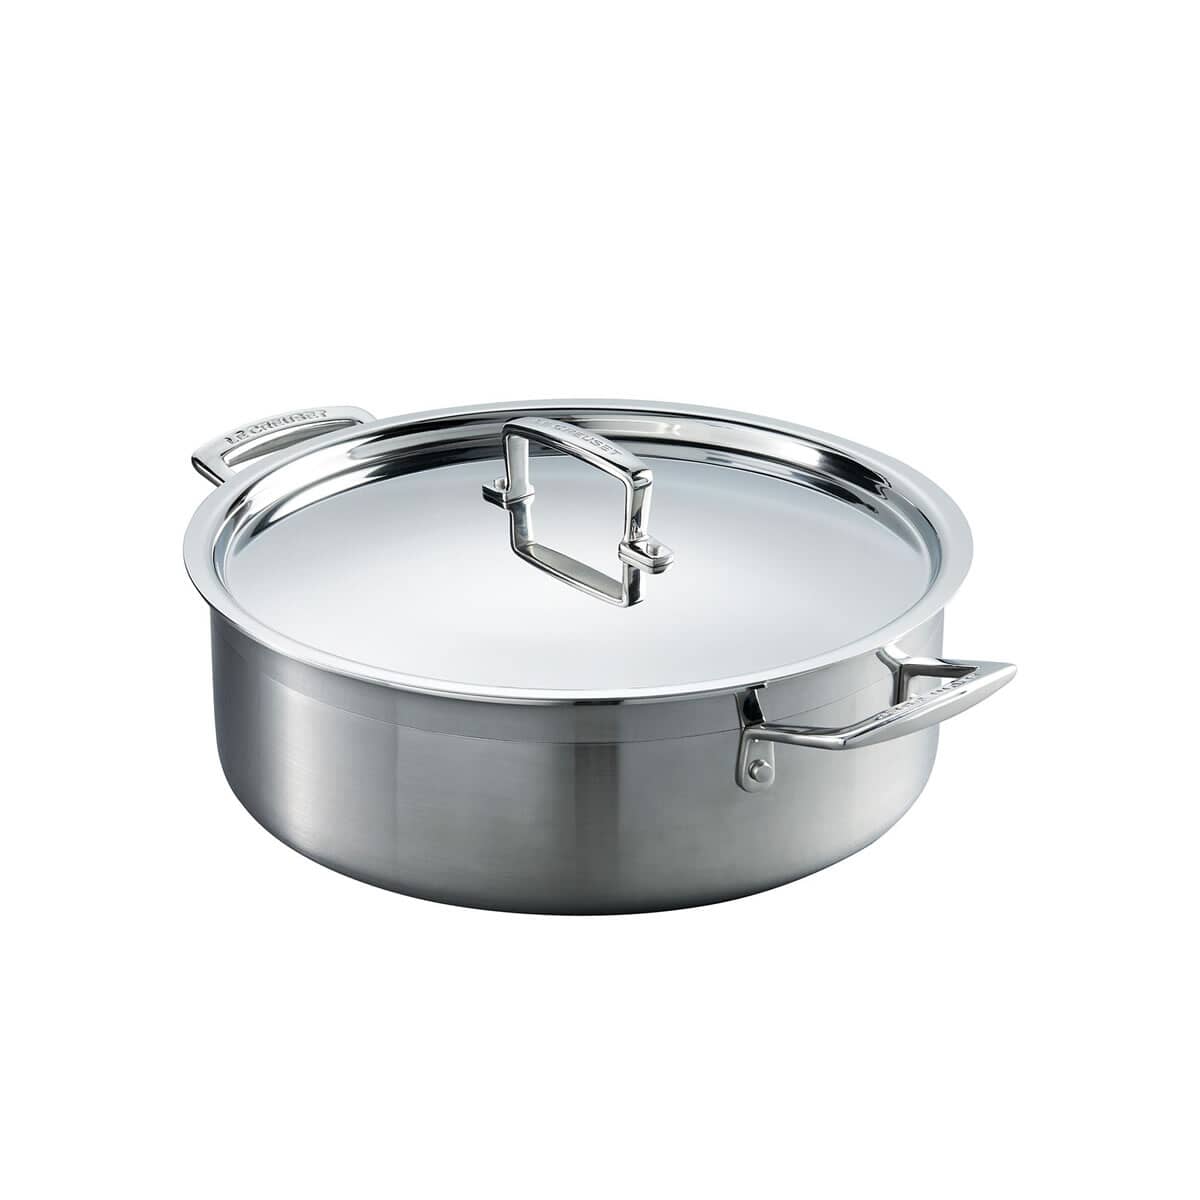 Ø 28 cm Le Creuset Stainless Steel Lid 680 g 3-ply 